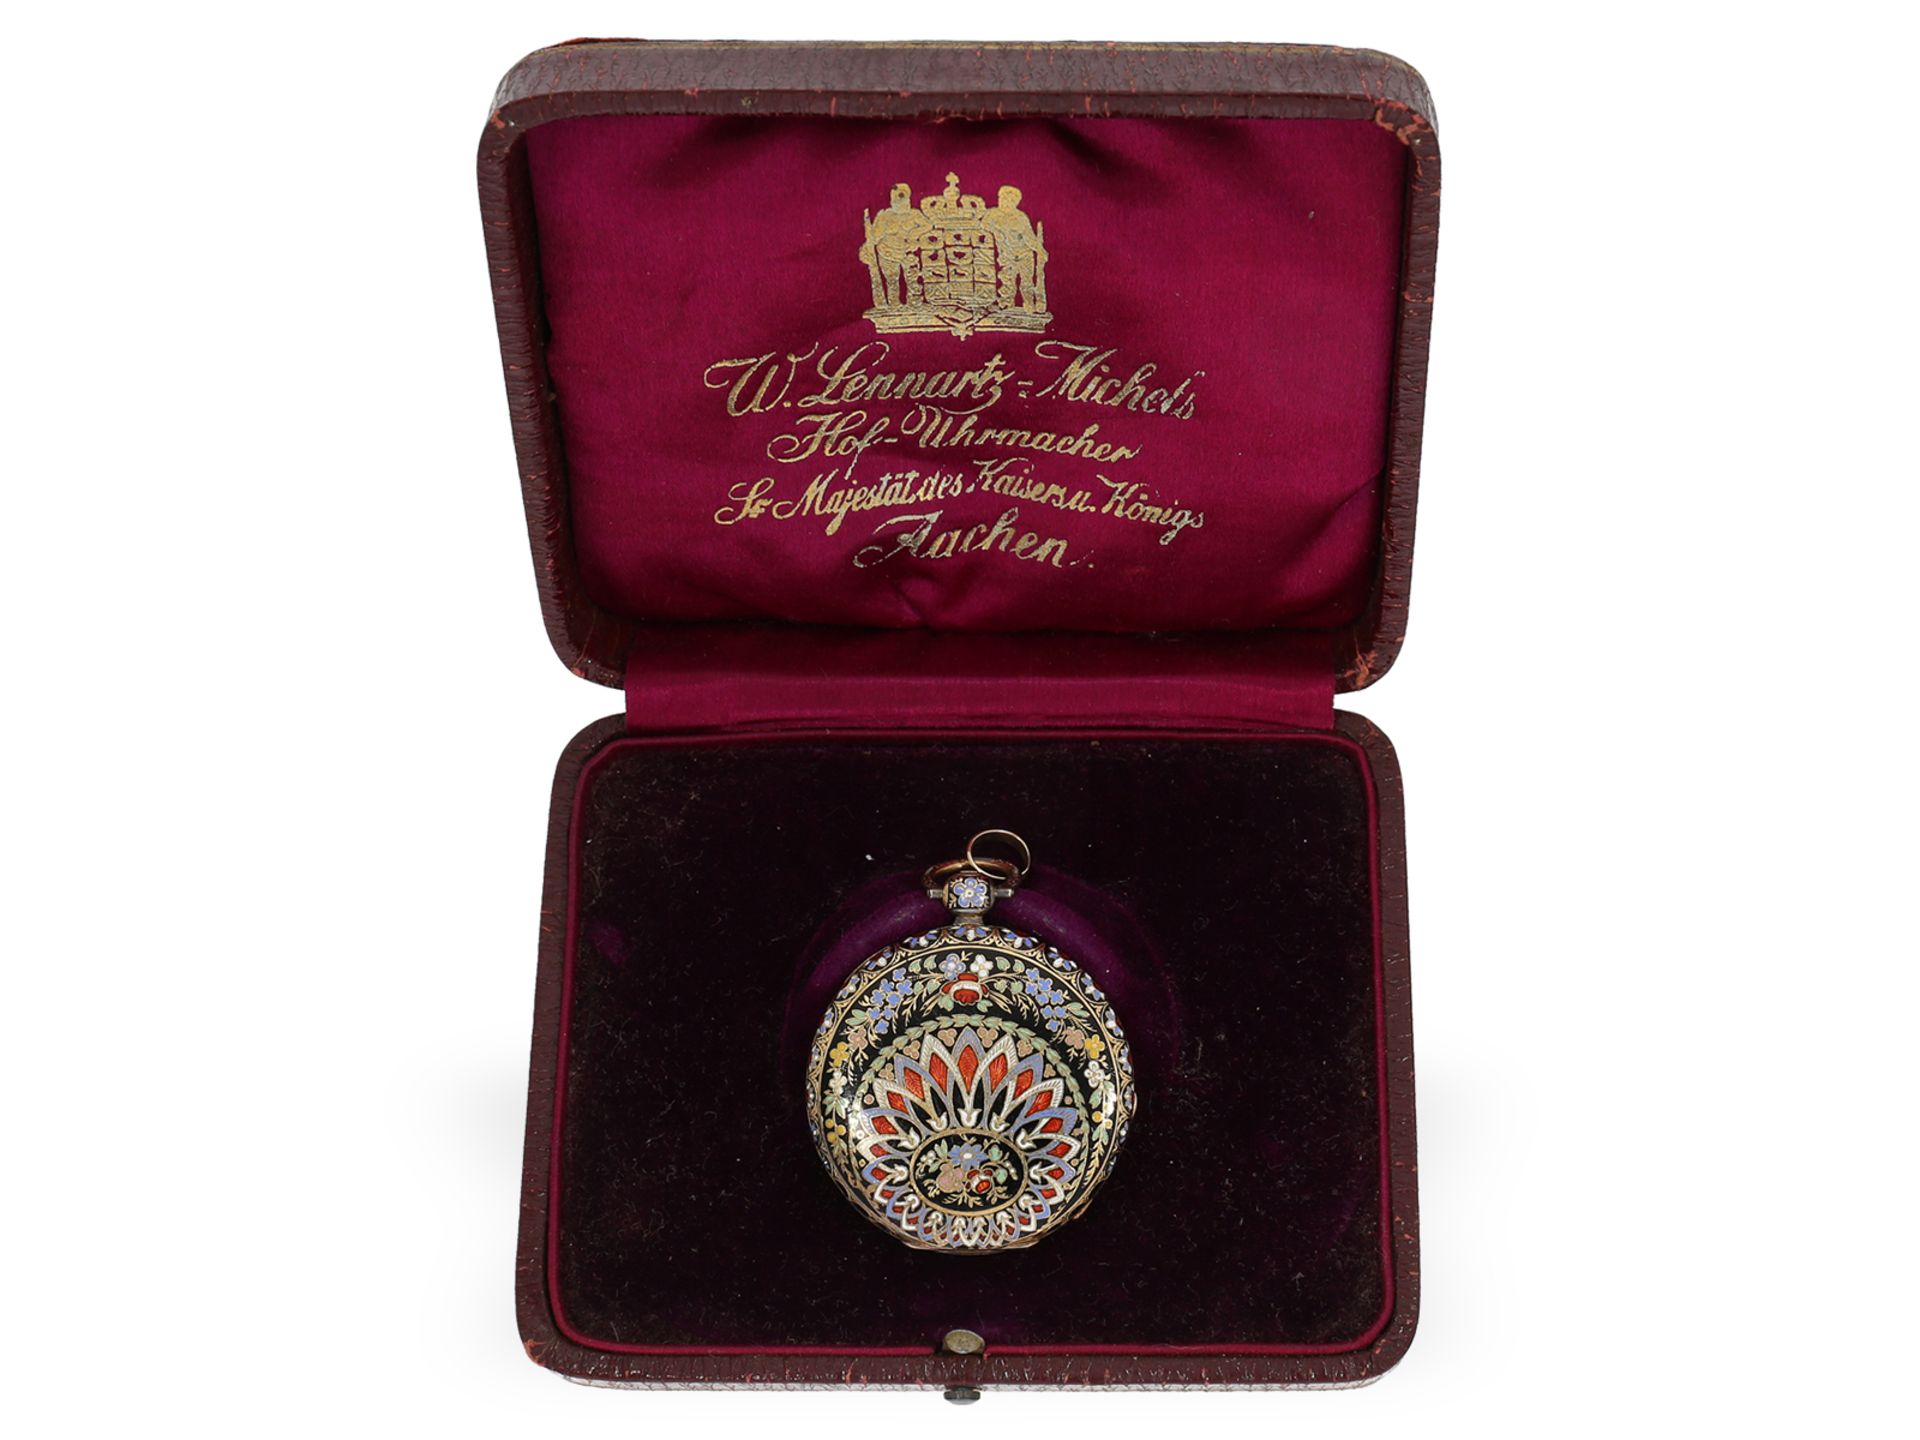 Pocket watch: magnificent gold/enamel lepine with original box and gold key, ca. 1820 - Image 7 of 9